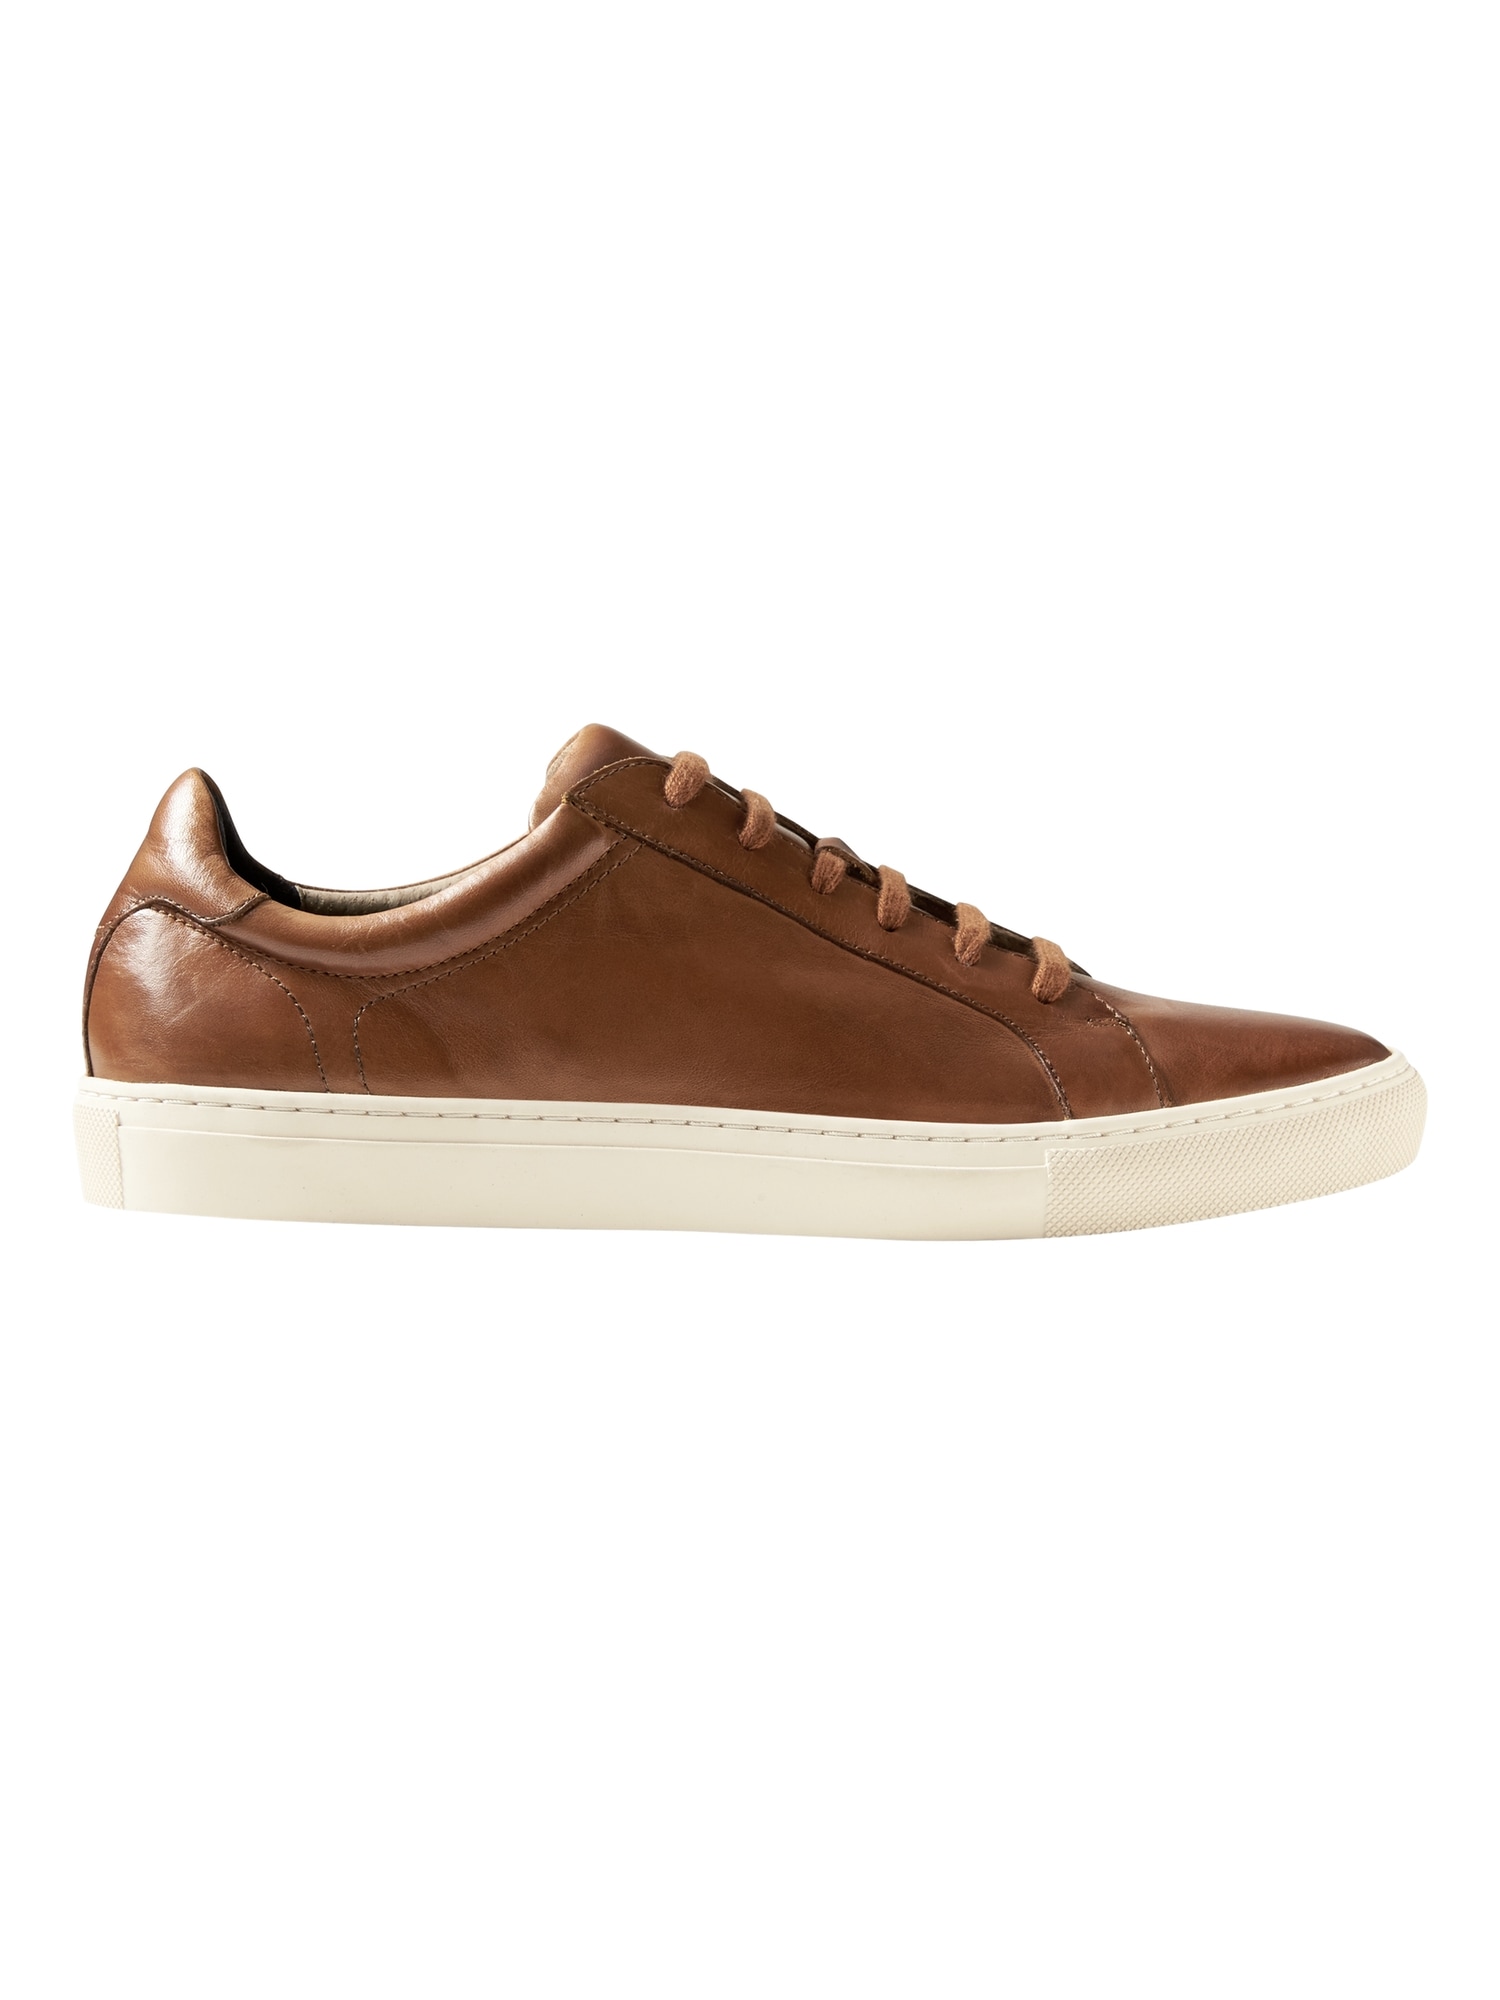 nicklas leather sneaker review